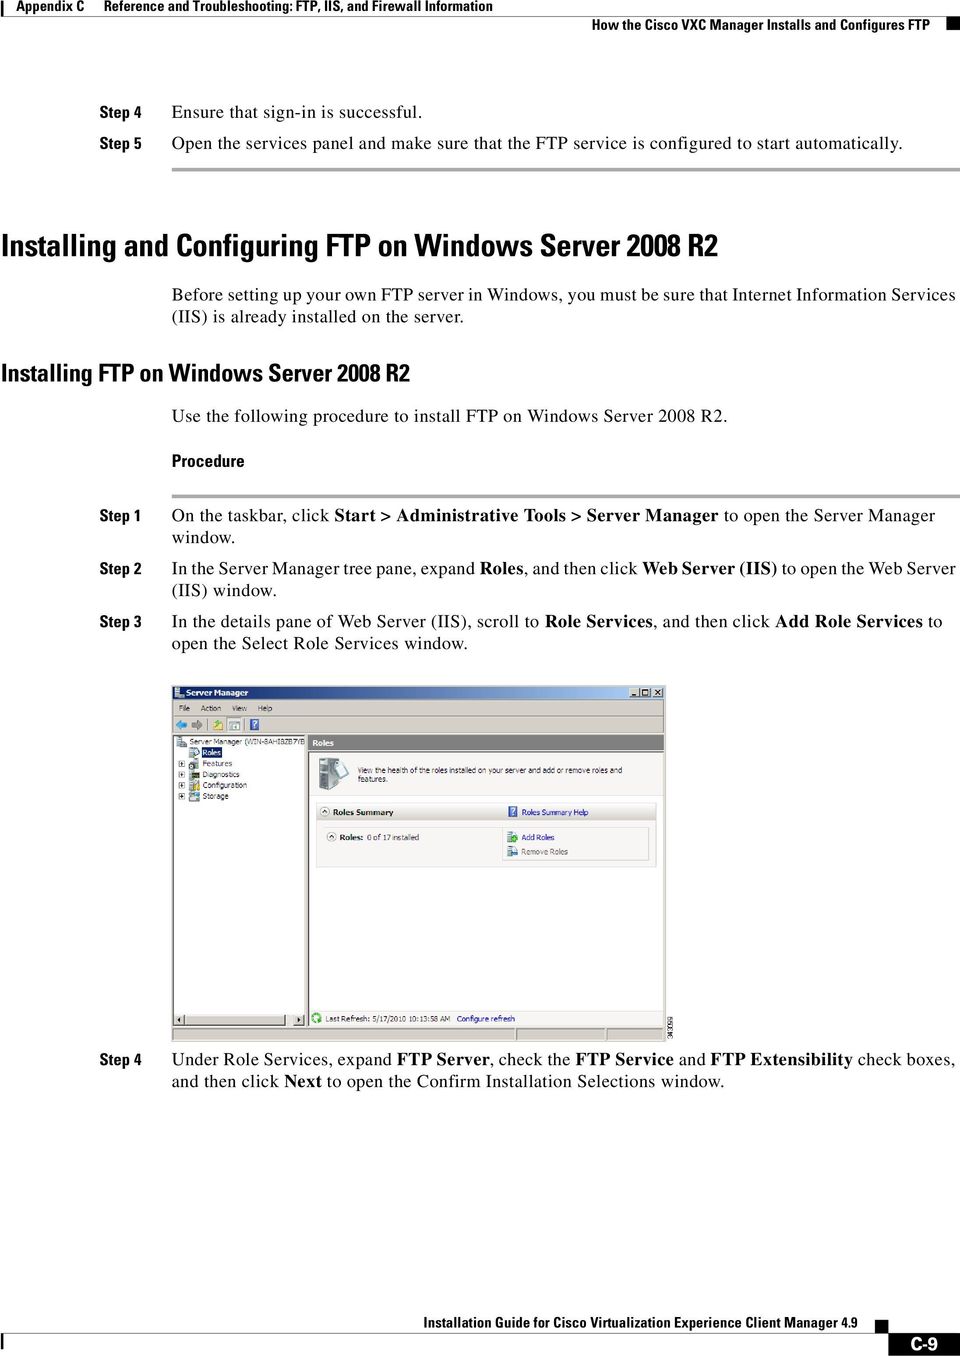 Installing and Configuring FTP on Windows Server 2008 R2 Before setting up your own FTP server in Windows, you must be sure that Internet Information Services (IIS) is already installed on the server.